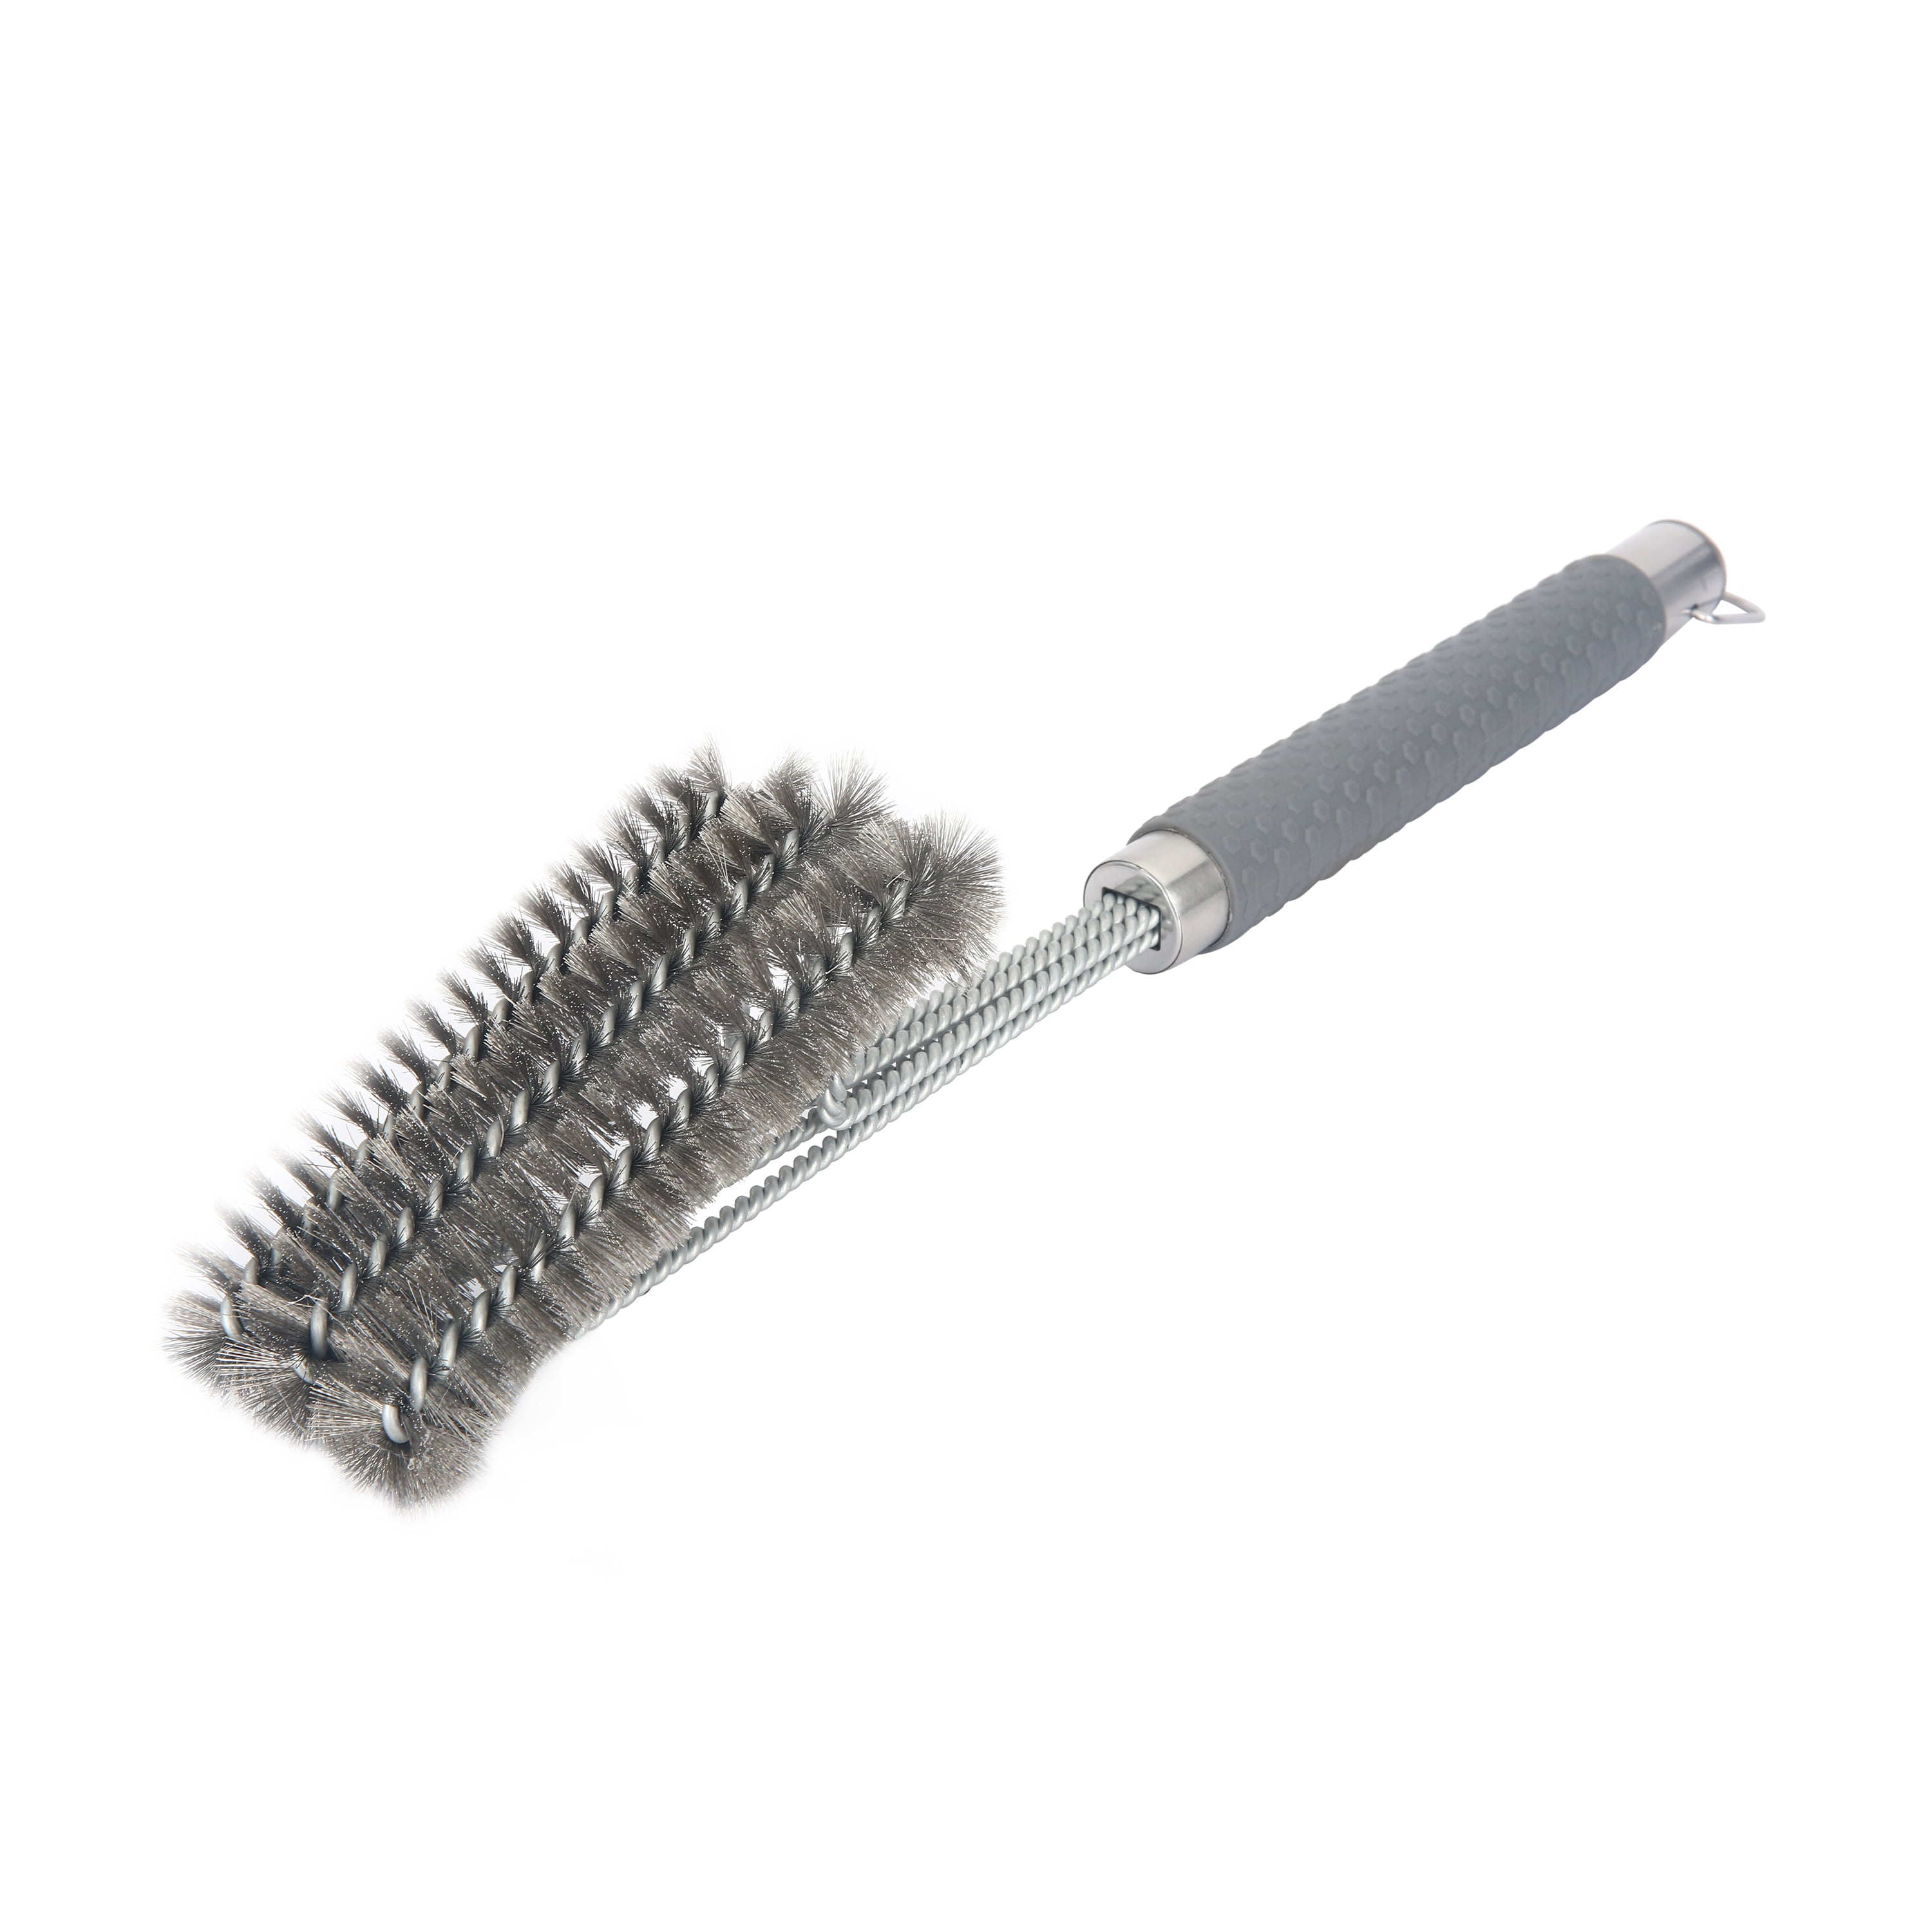 Ignite Stainless Steel Cool Grill Brush | Durable & Effective with Safe  Nylon Grill Bristles | No Risk of Broken Wire bristles | Safe for  Porcelain